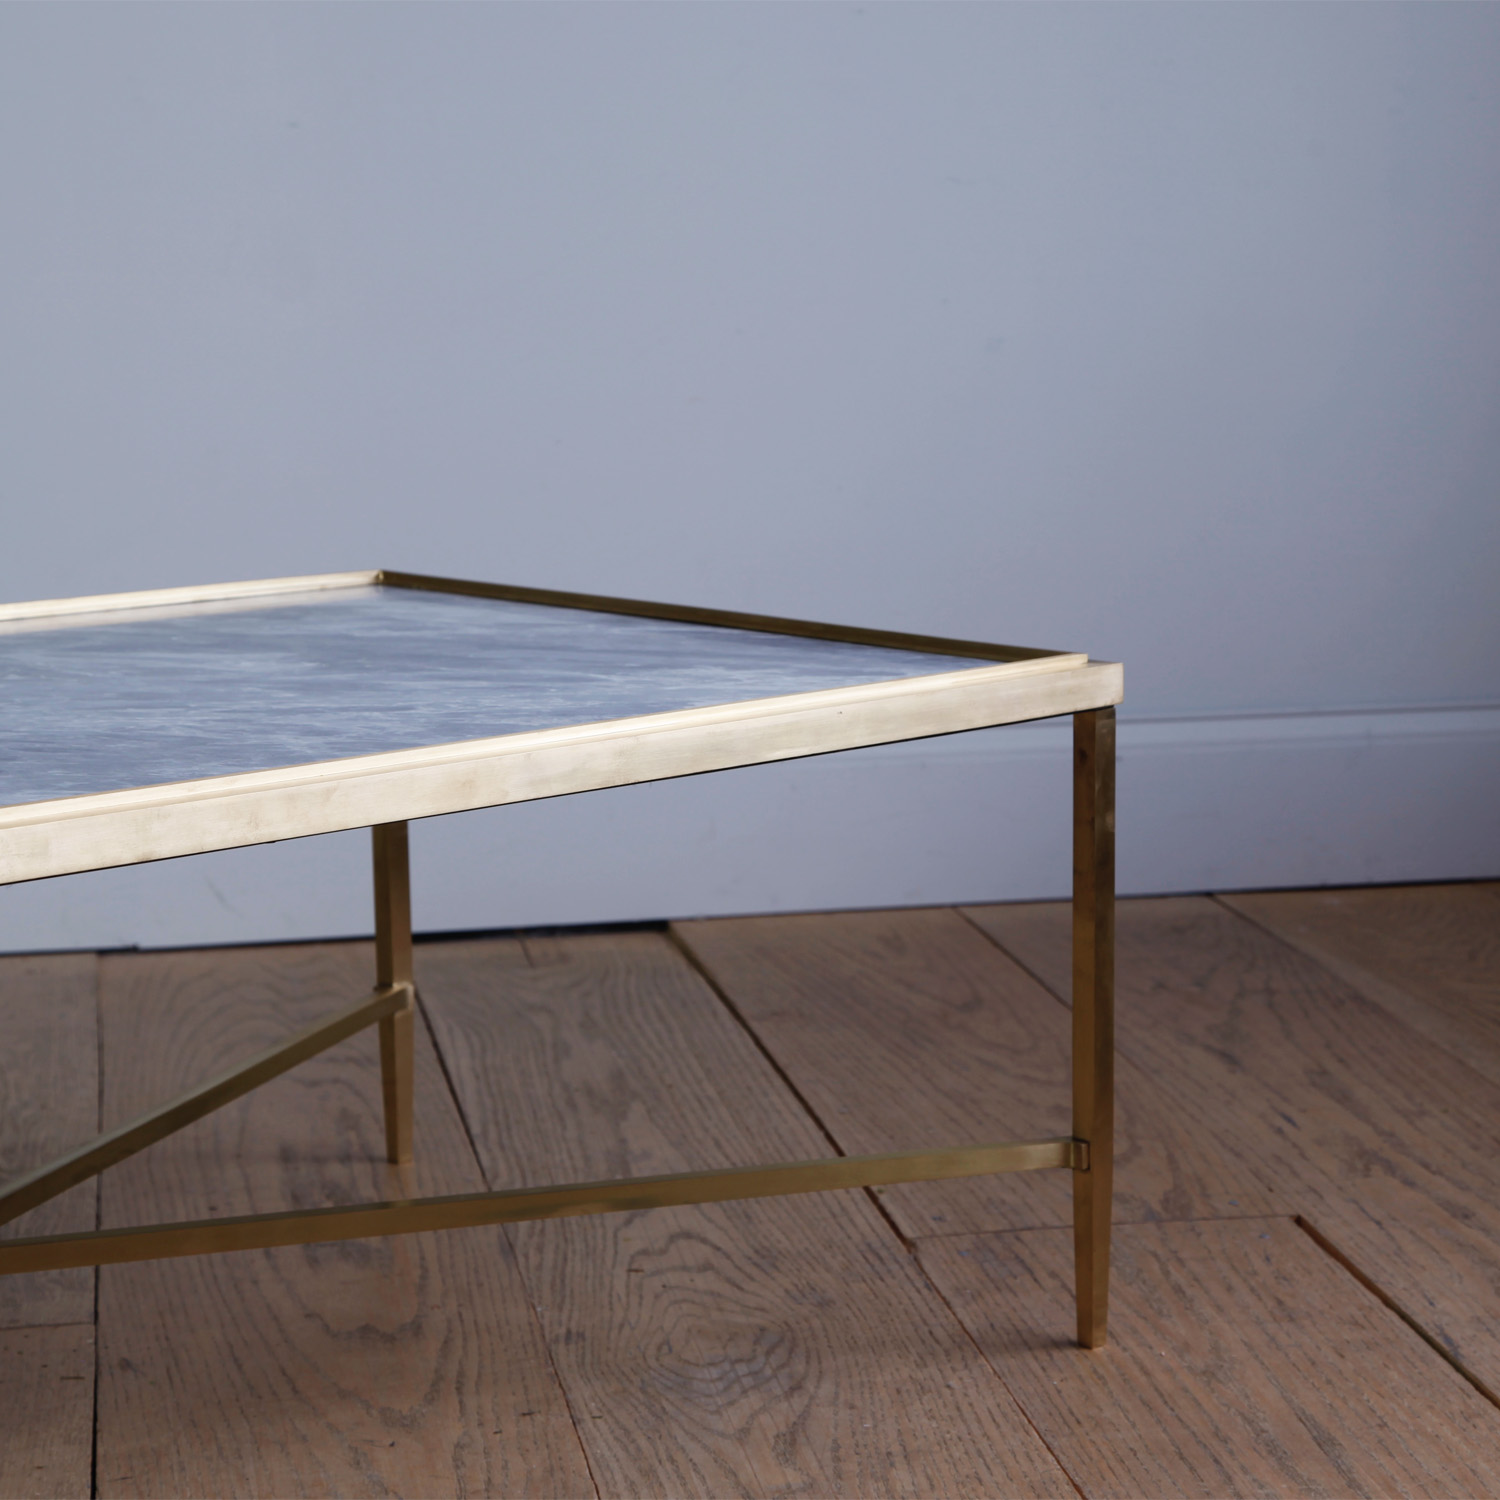 The Daedalus Table in Brass and Stone by Lawton Mull